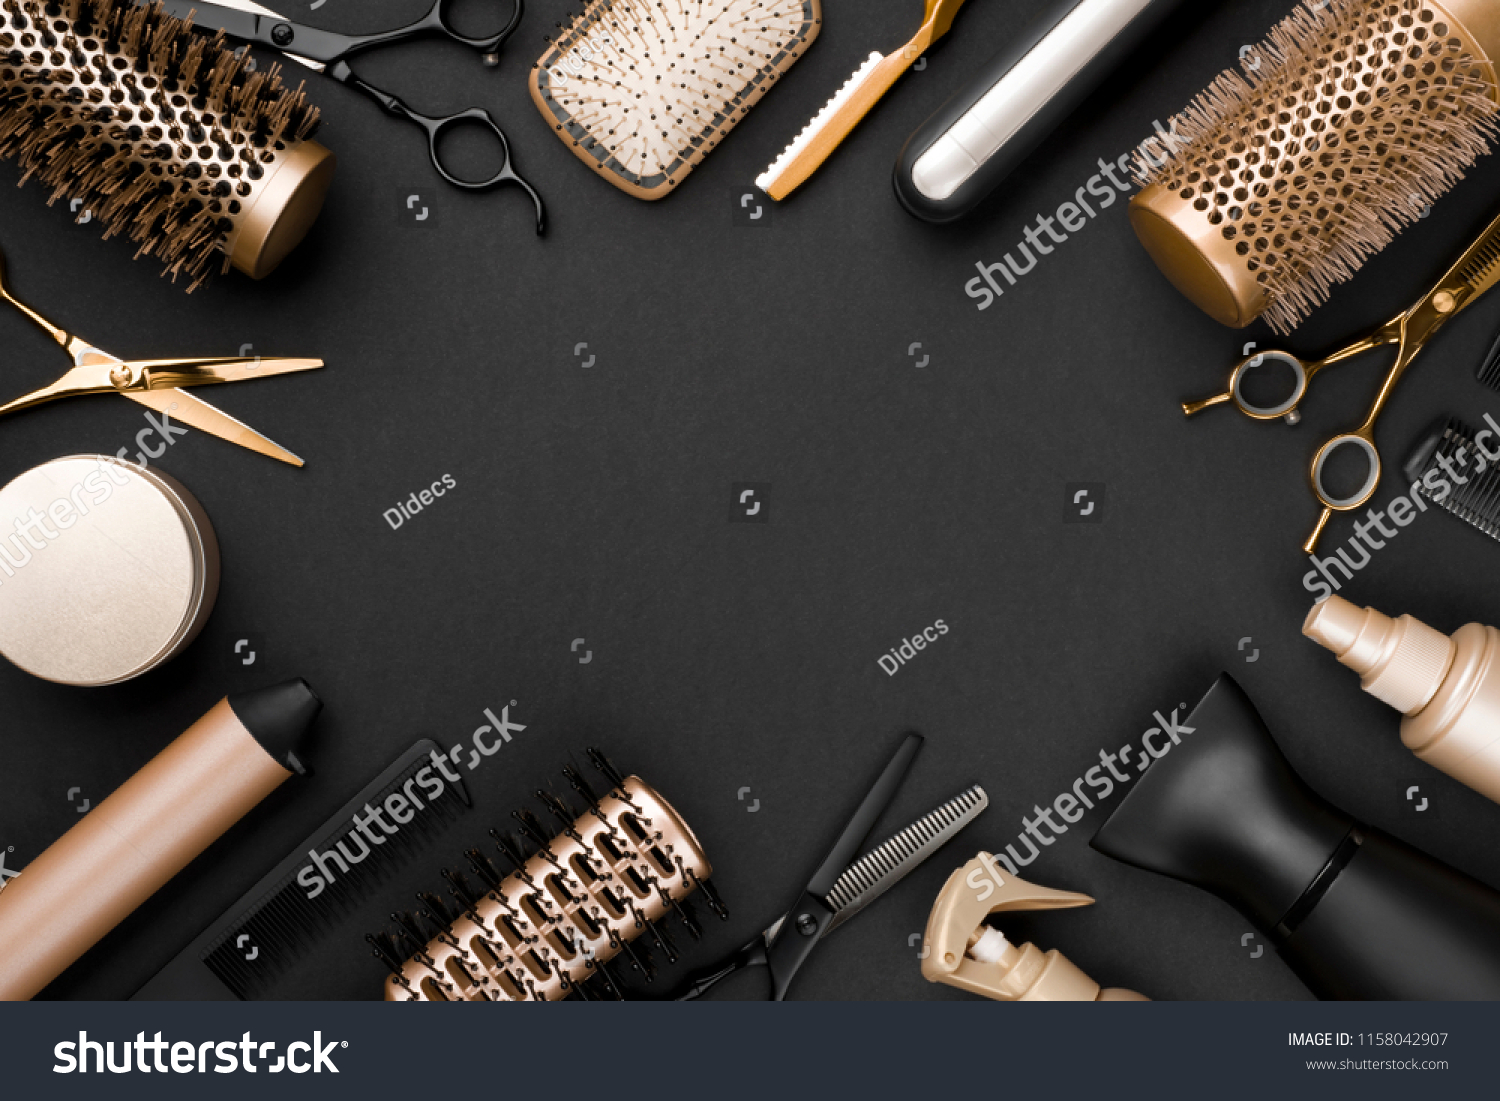 Hairdresser tools on black background with copy space in center #1158042907